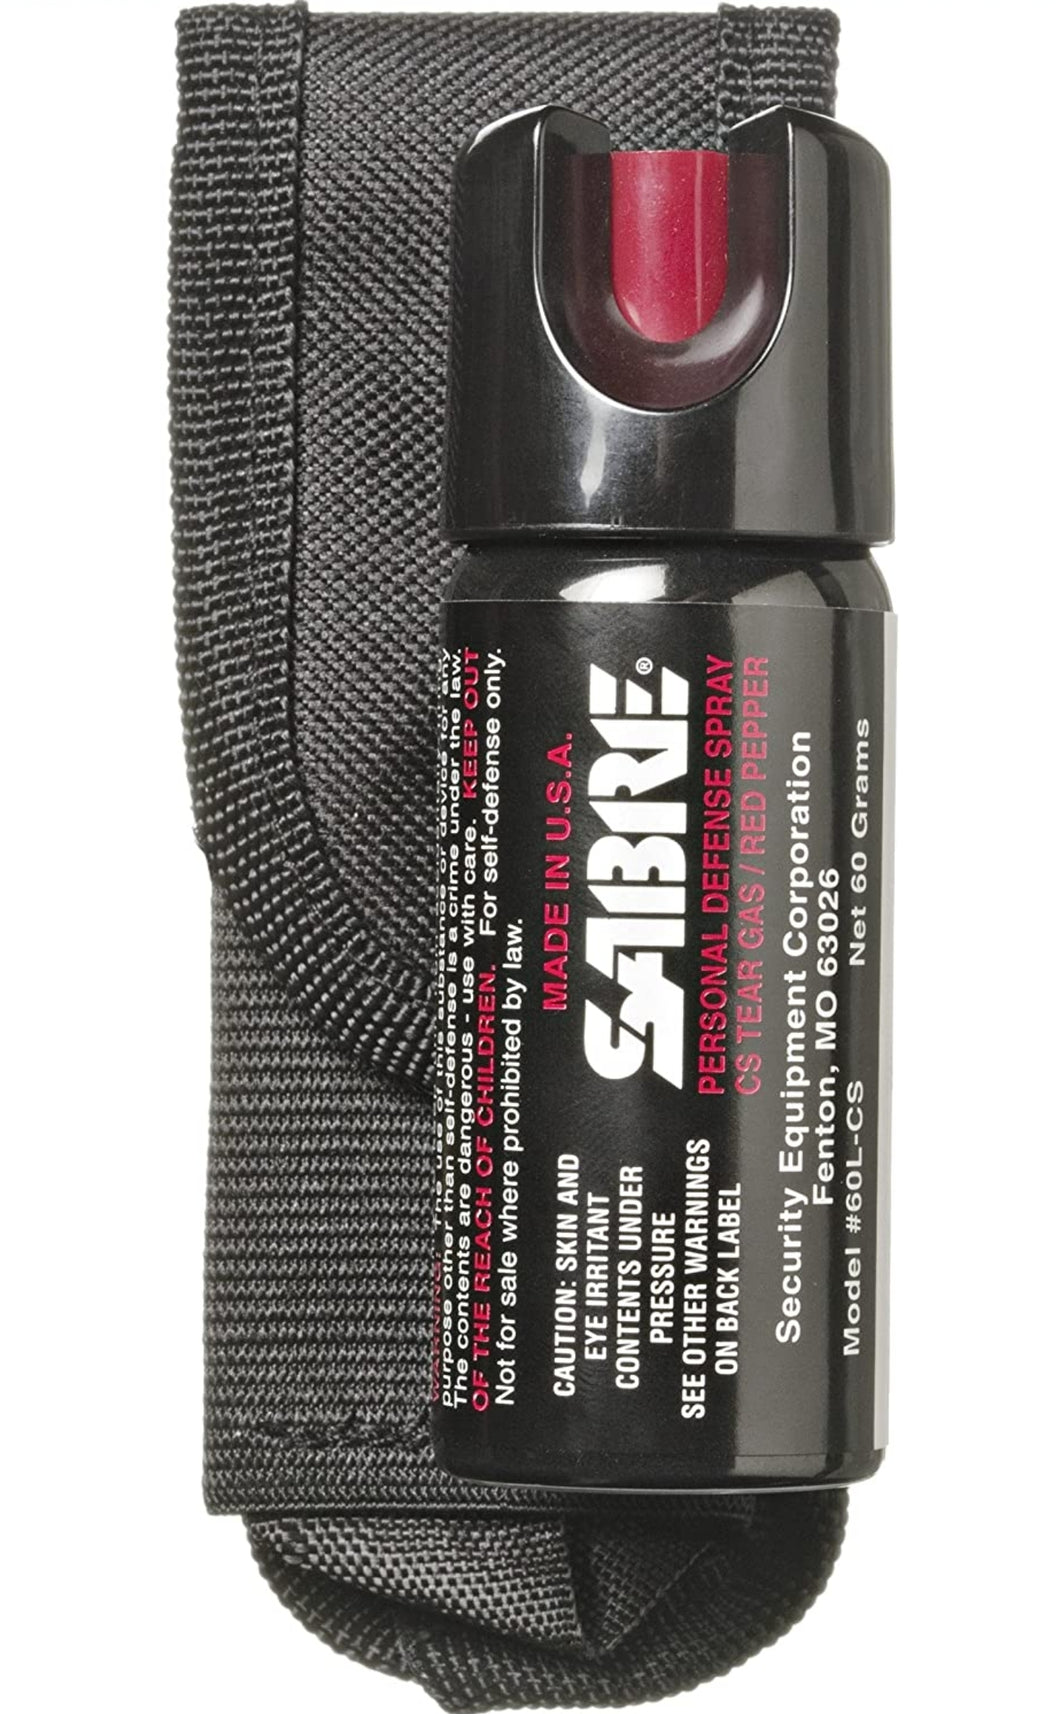 Pepper Spray with Holster